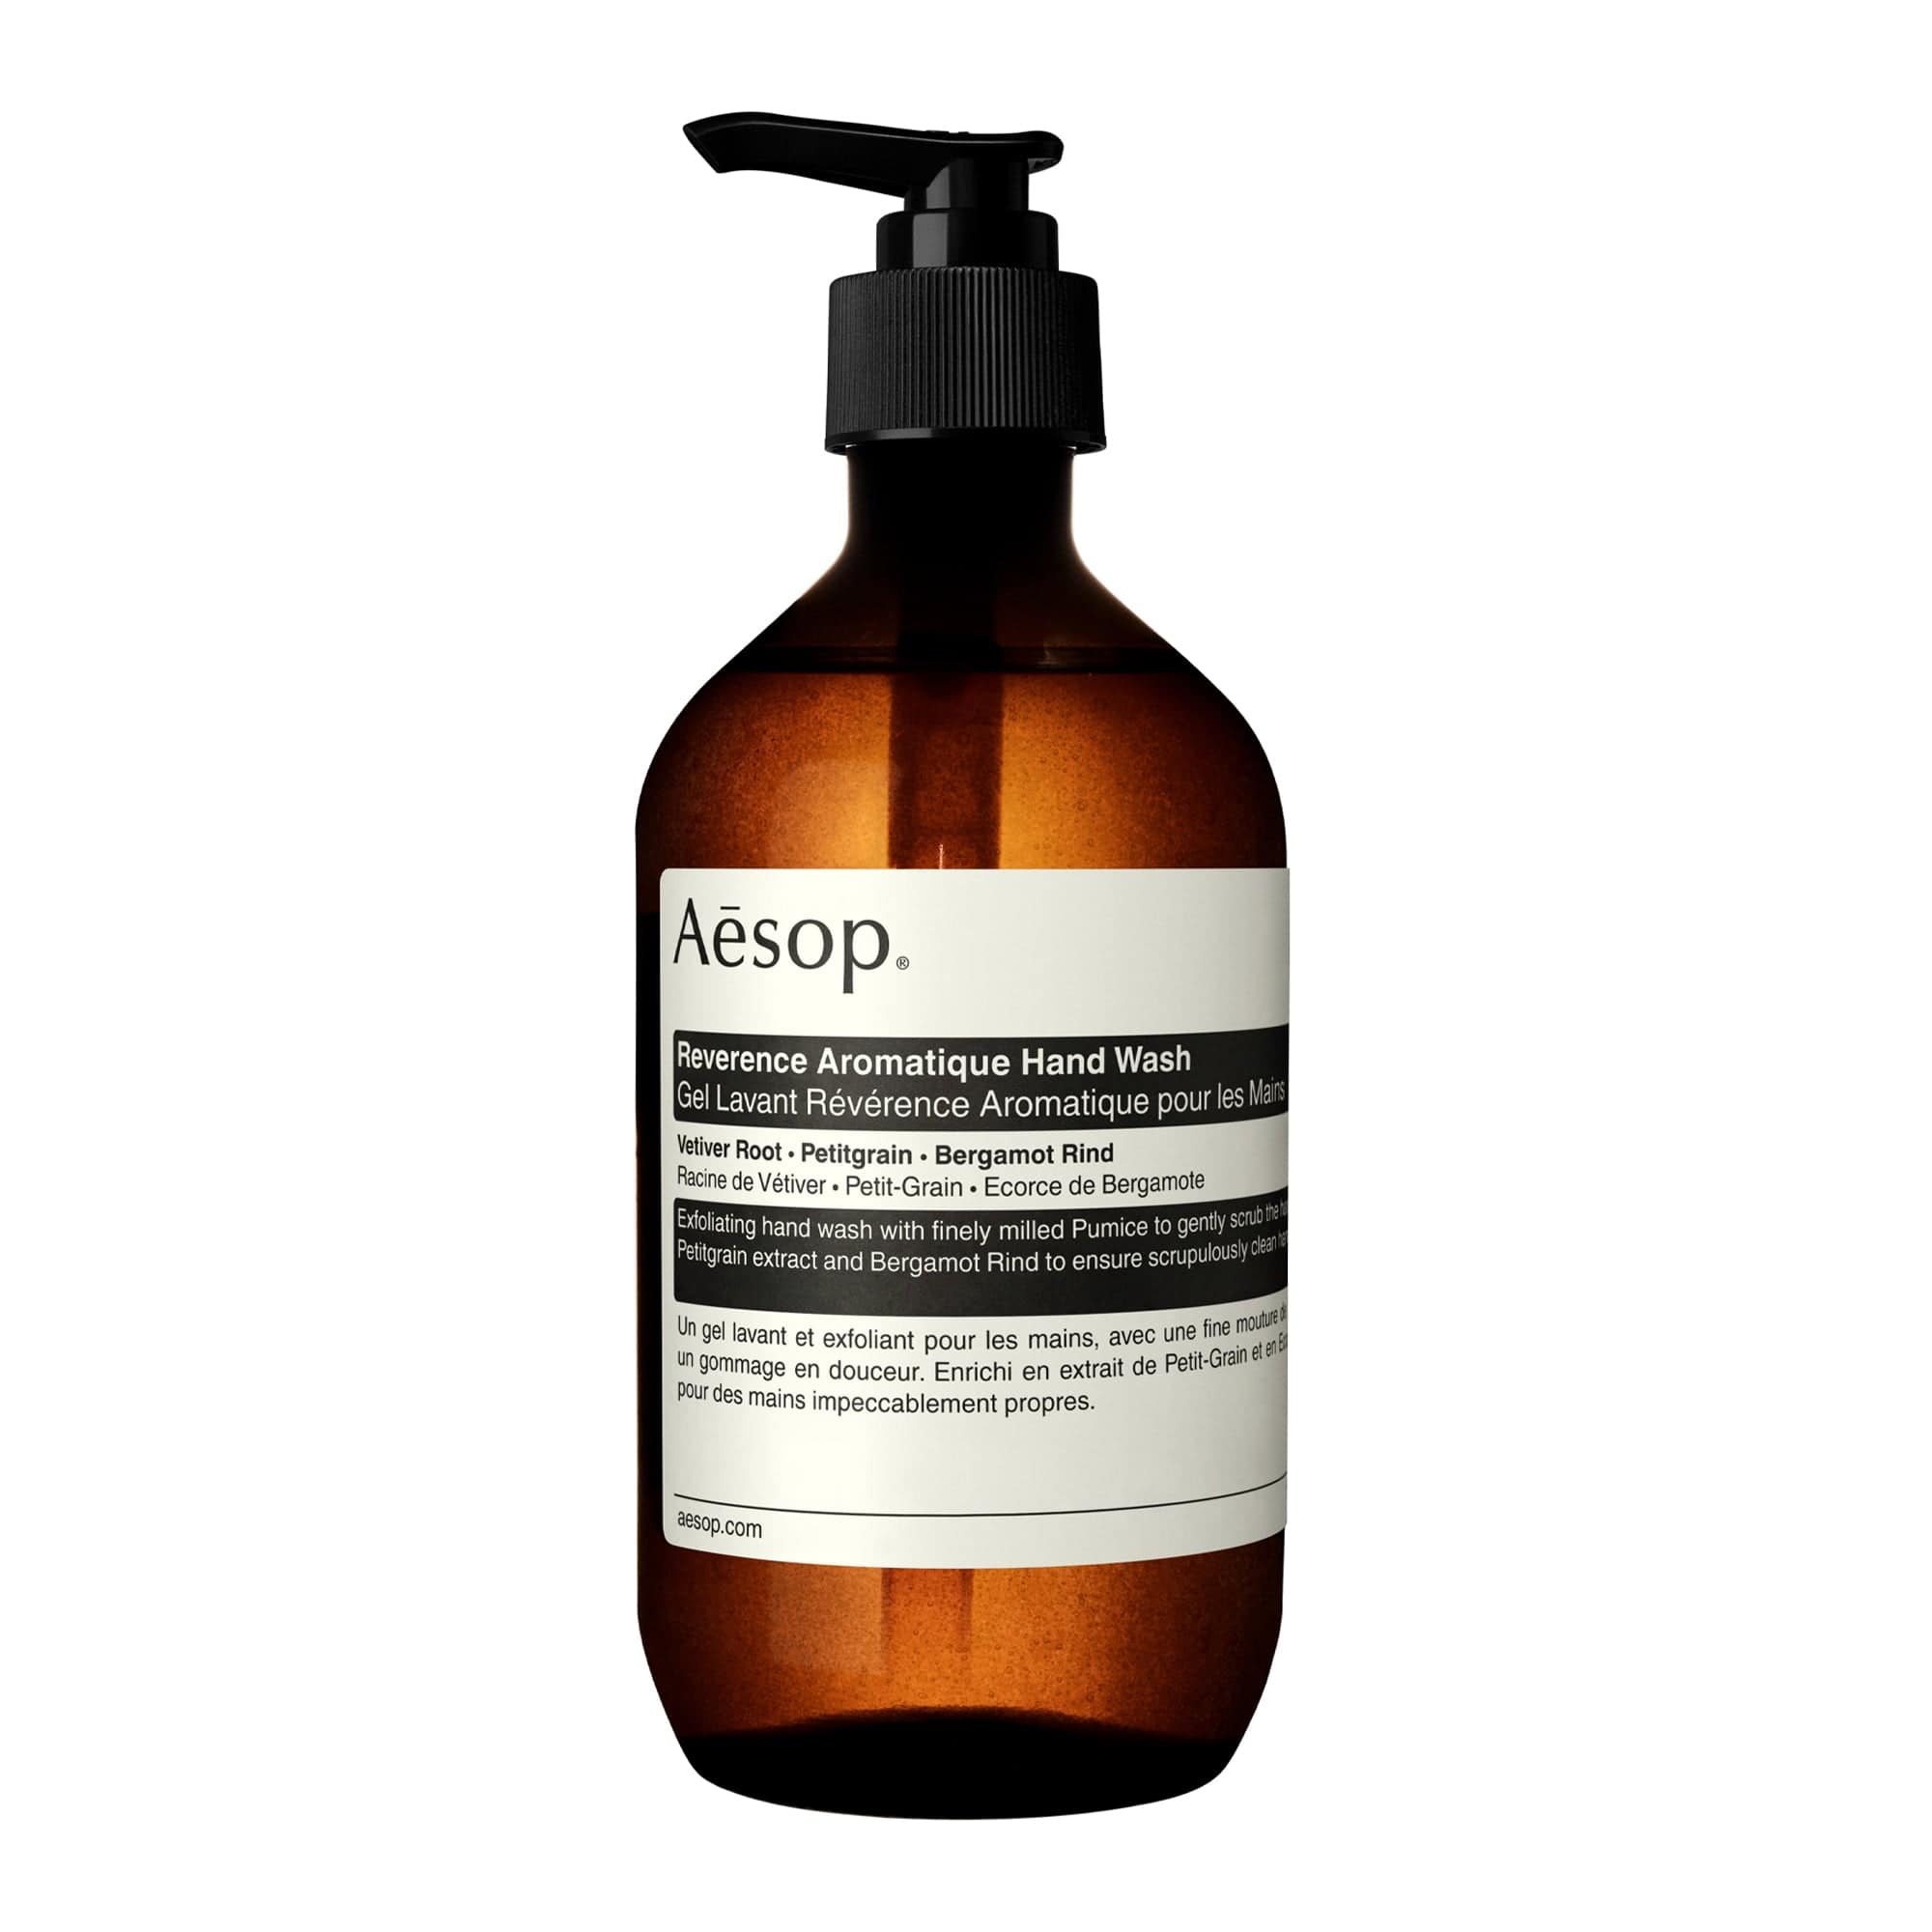 Reverence Aromatique Hand Wash Aesop Hand Cleaner